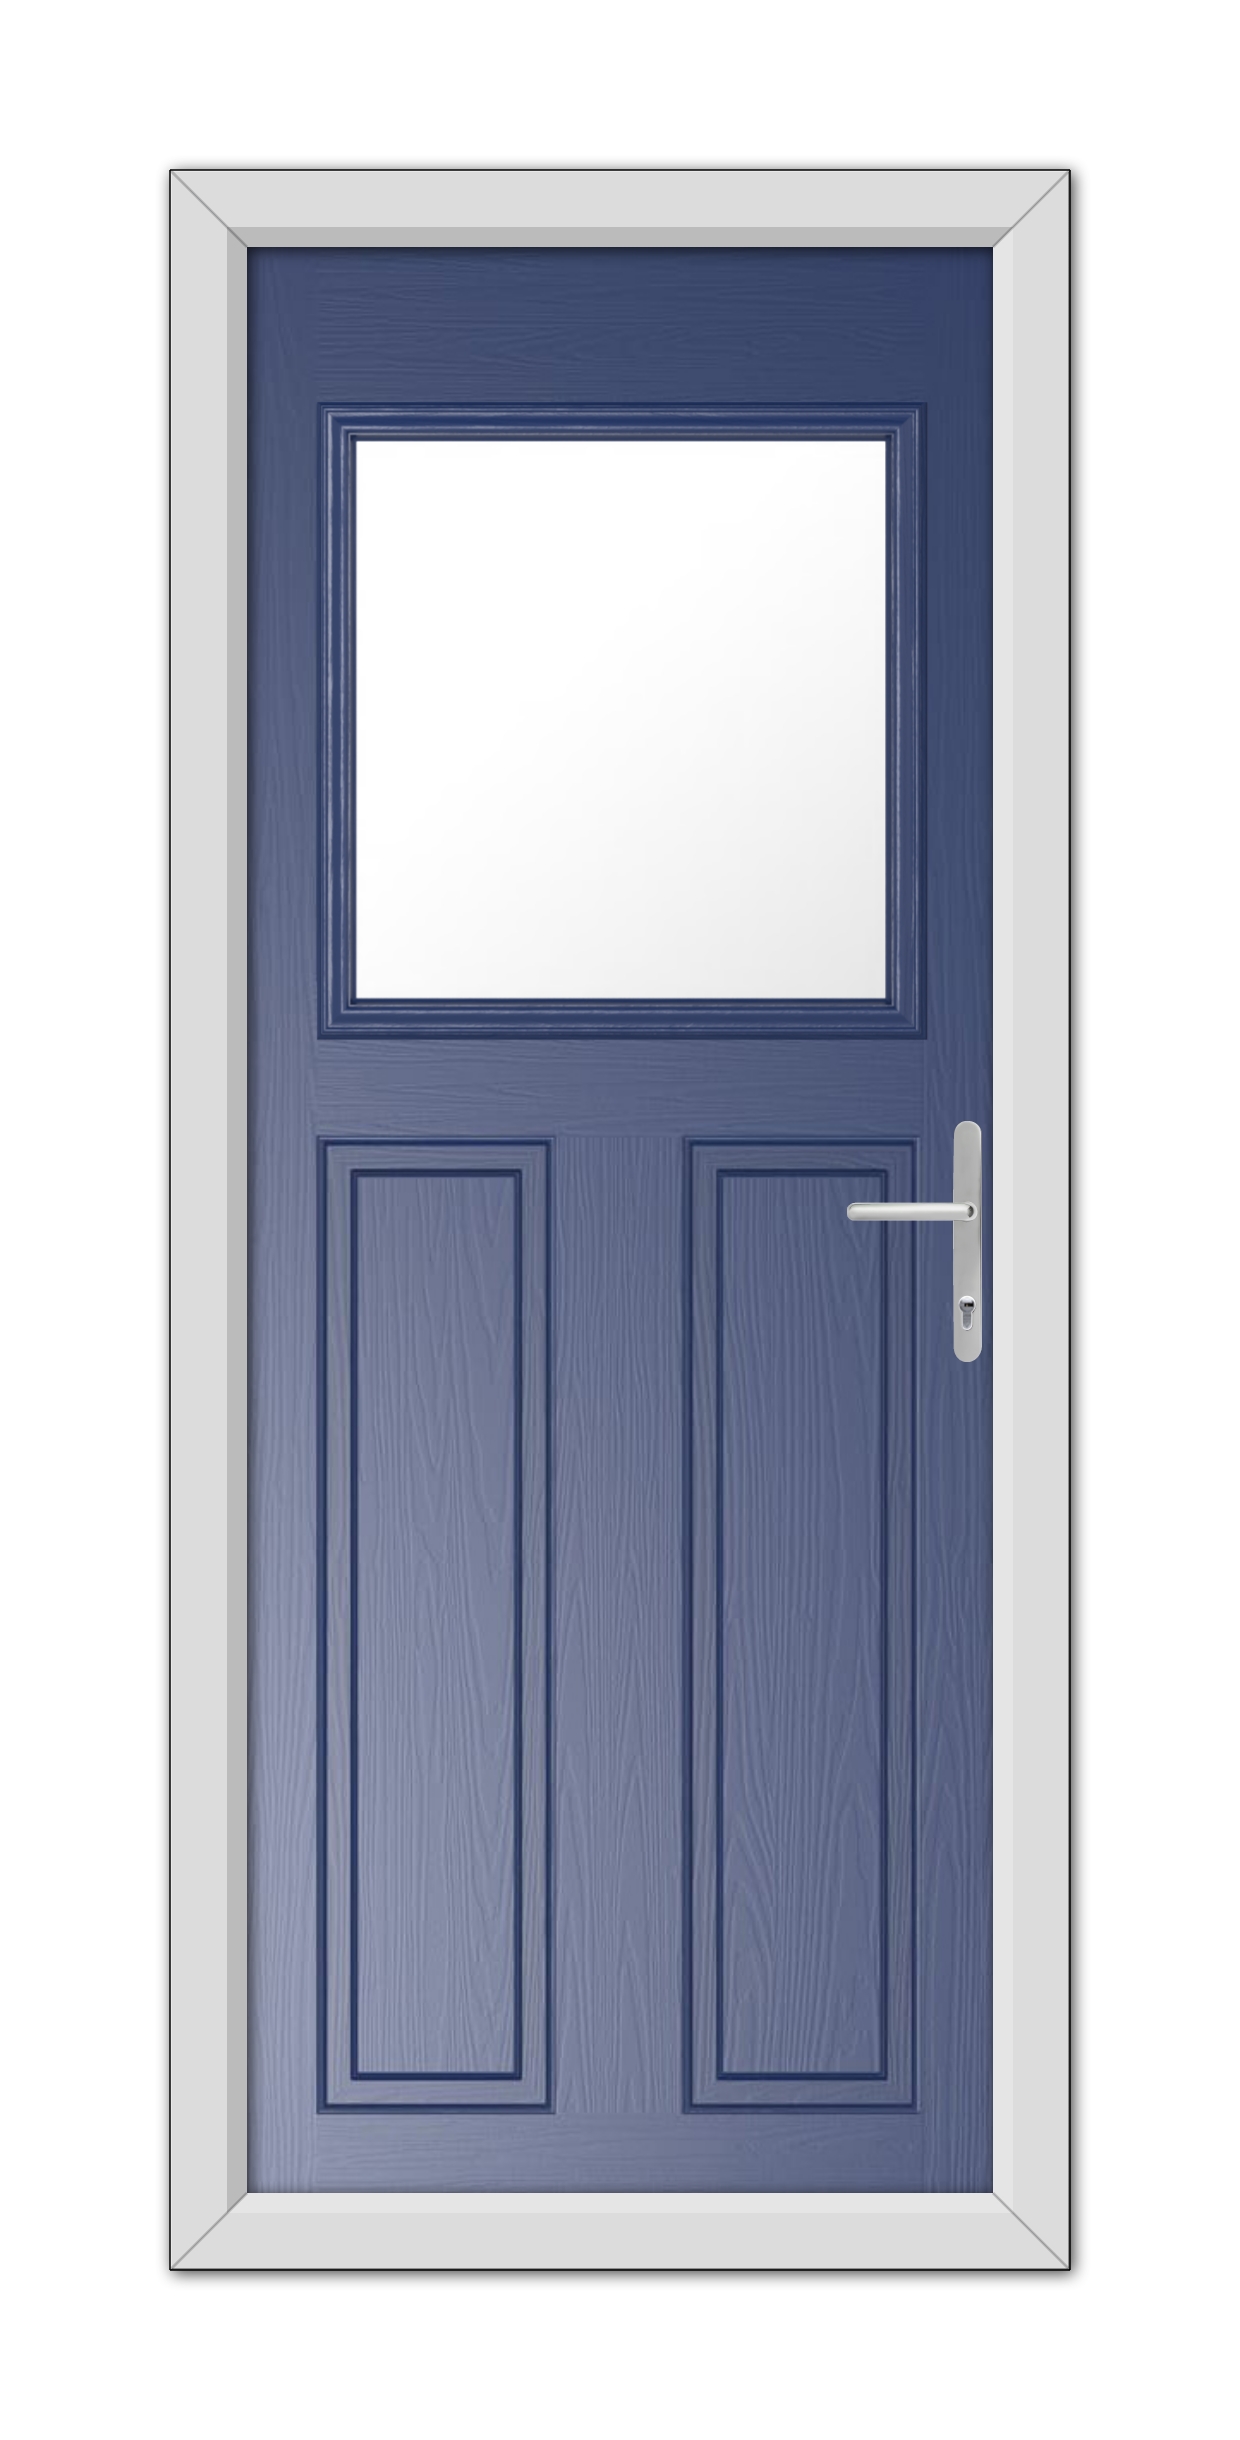 A Blue Axwell Composite Door 48mm Timber Core with a rectangular window at the top, set in a white frame, featuring a modern handle on the right.